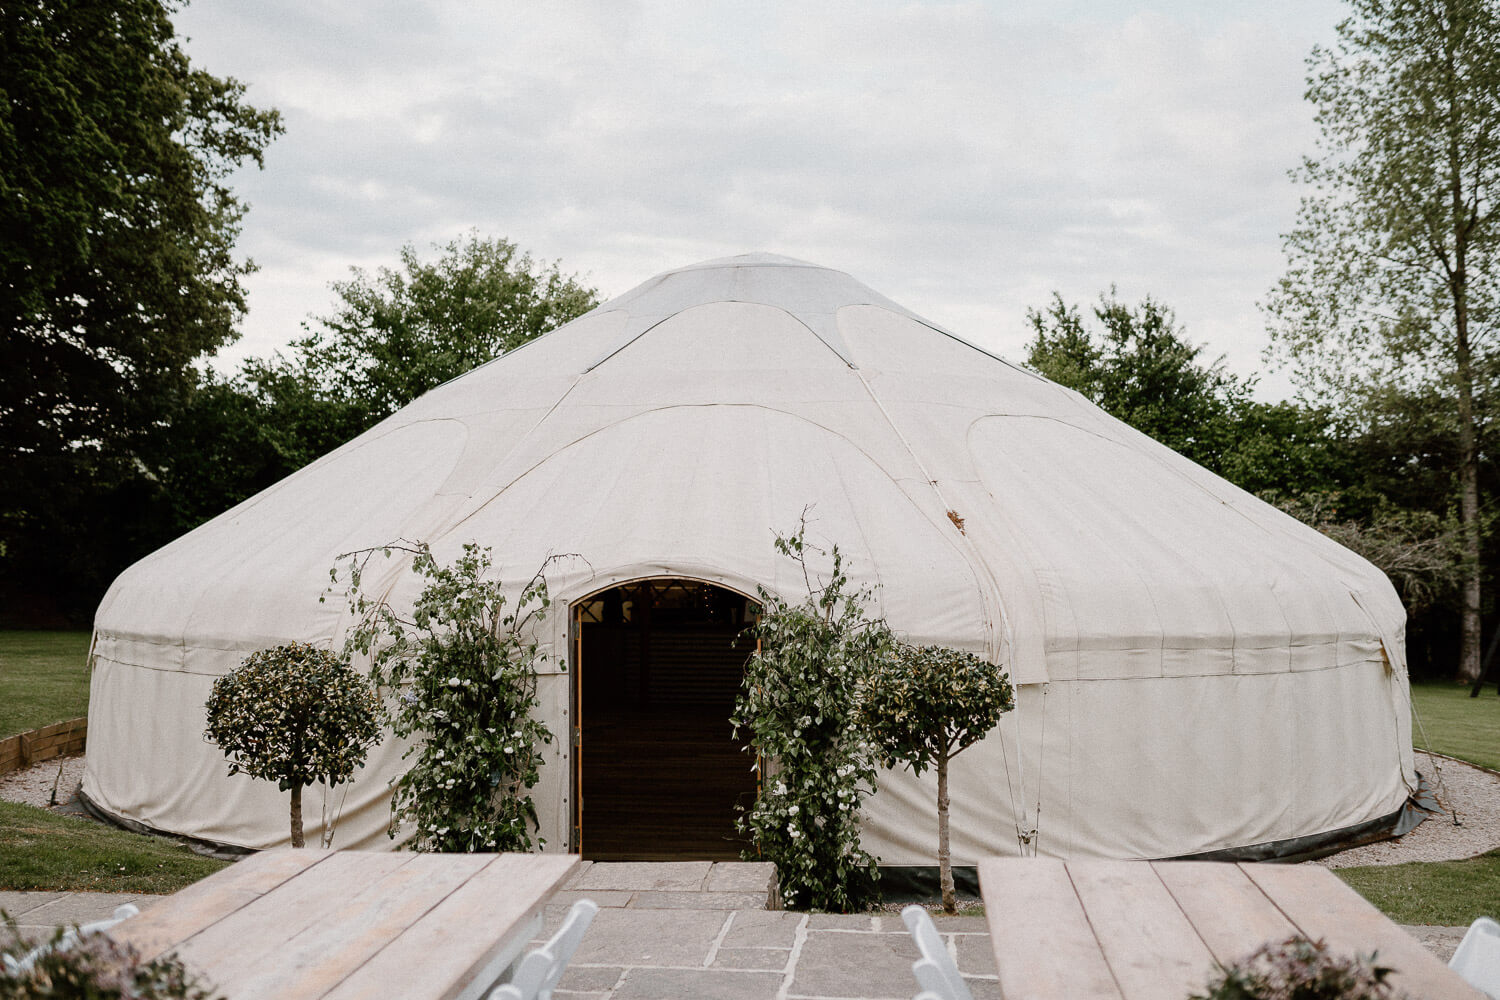 Wide angle view of the Big Yurt at Kingston Estate in Devon.